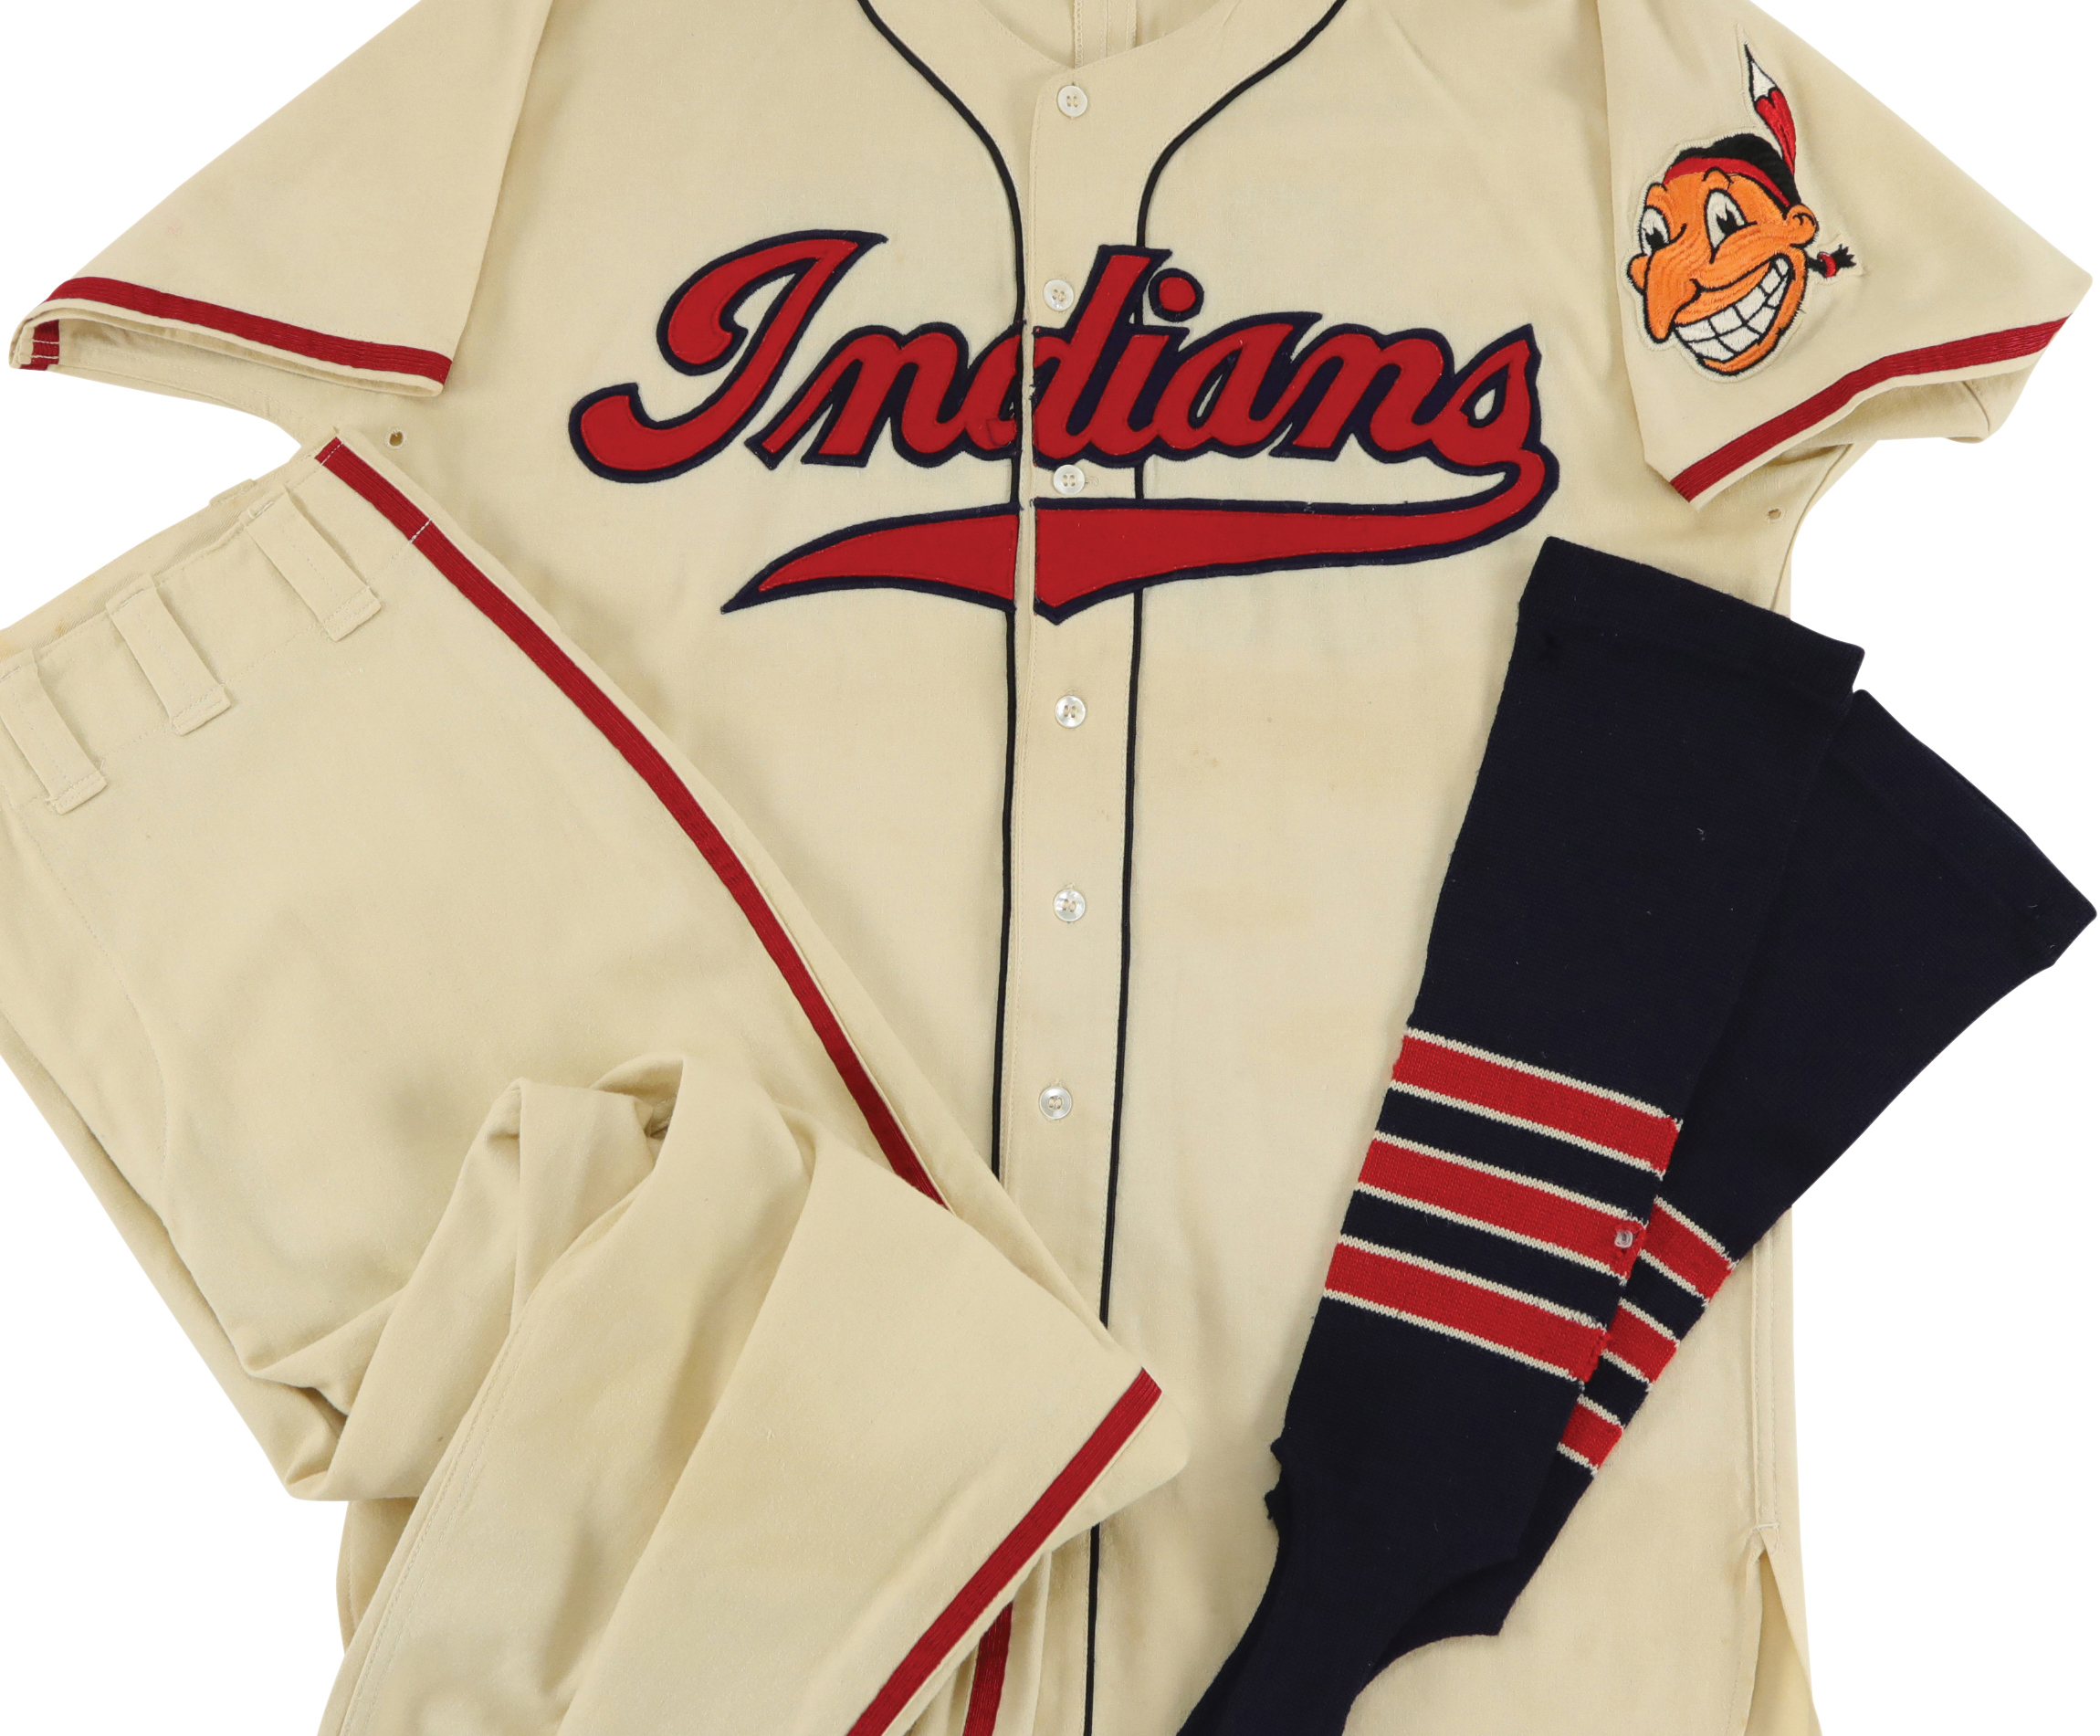 16 Cleveland Indians items up for auction (photos) 